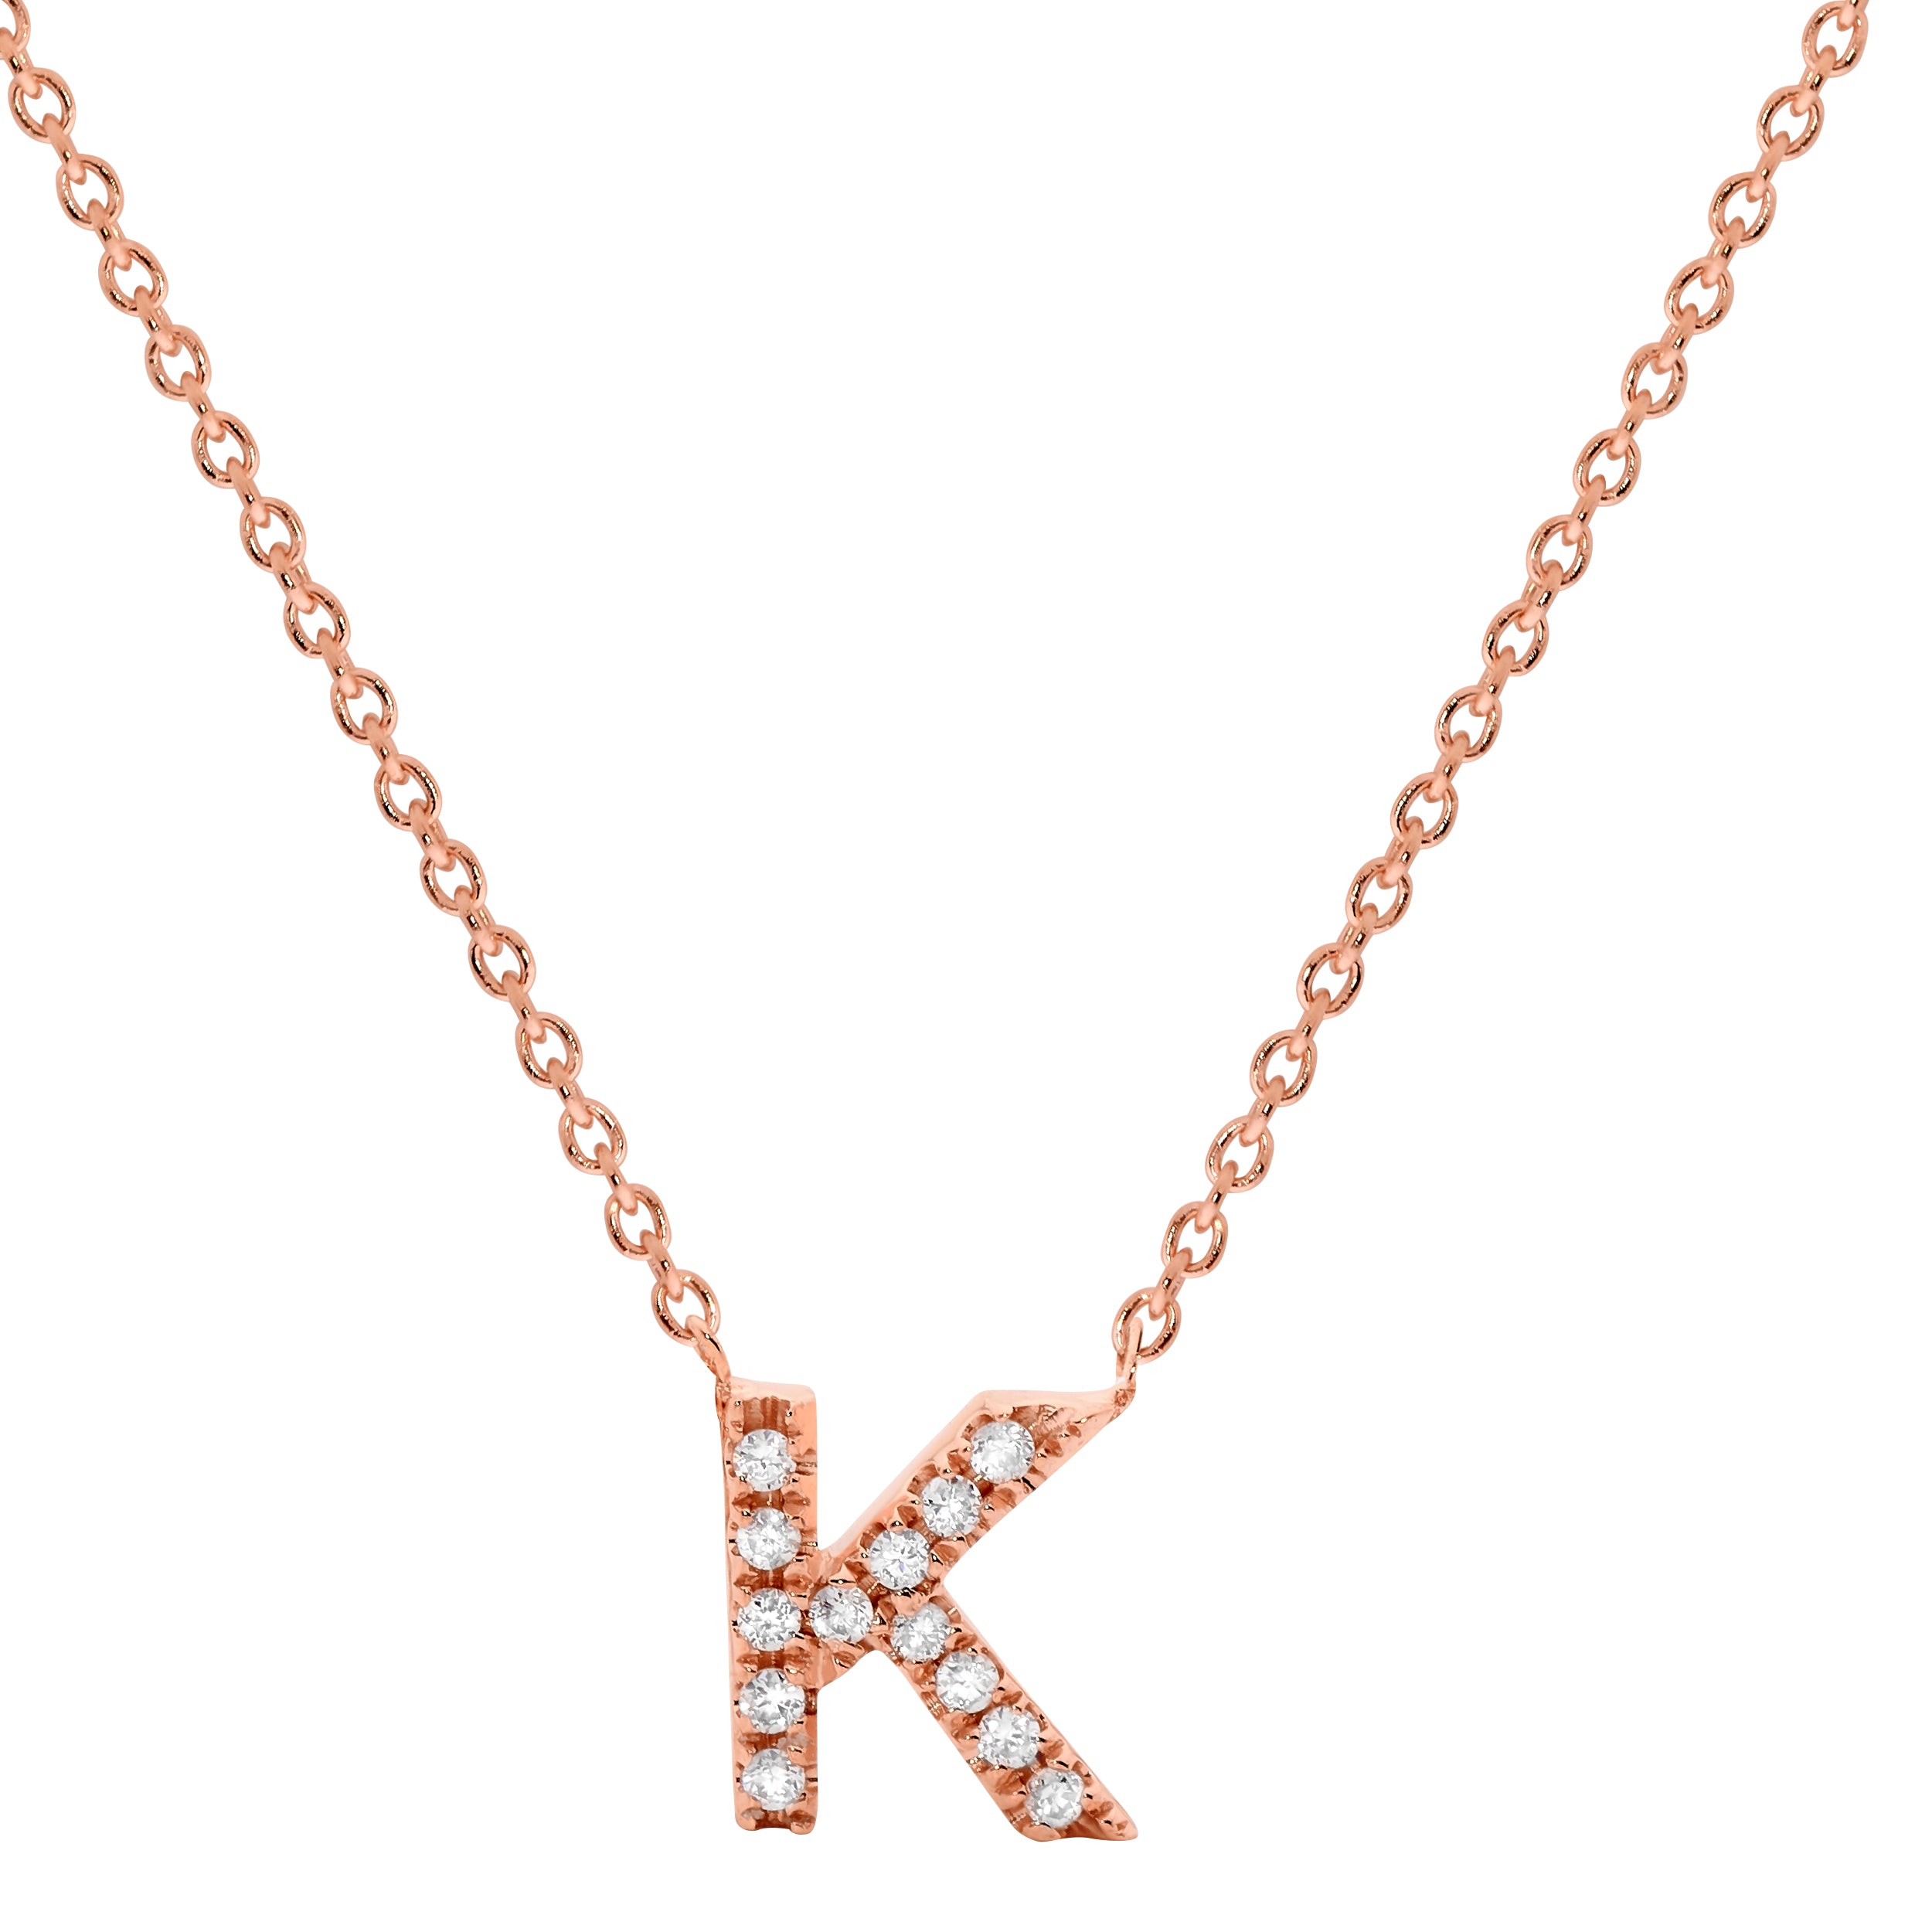 K necklace from Tiffany's | Silver necklace, Silver diamond necklace,  Tiffany & co.